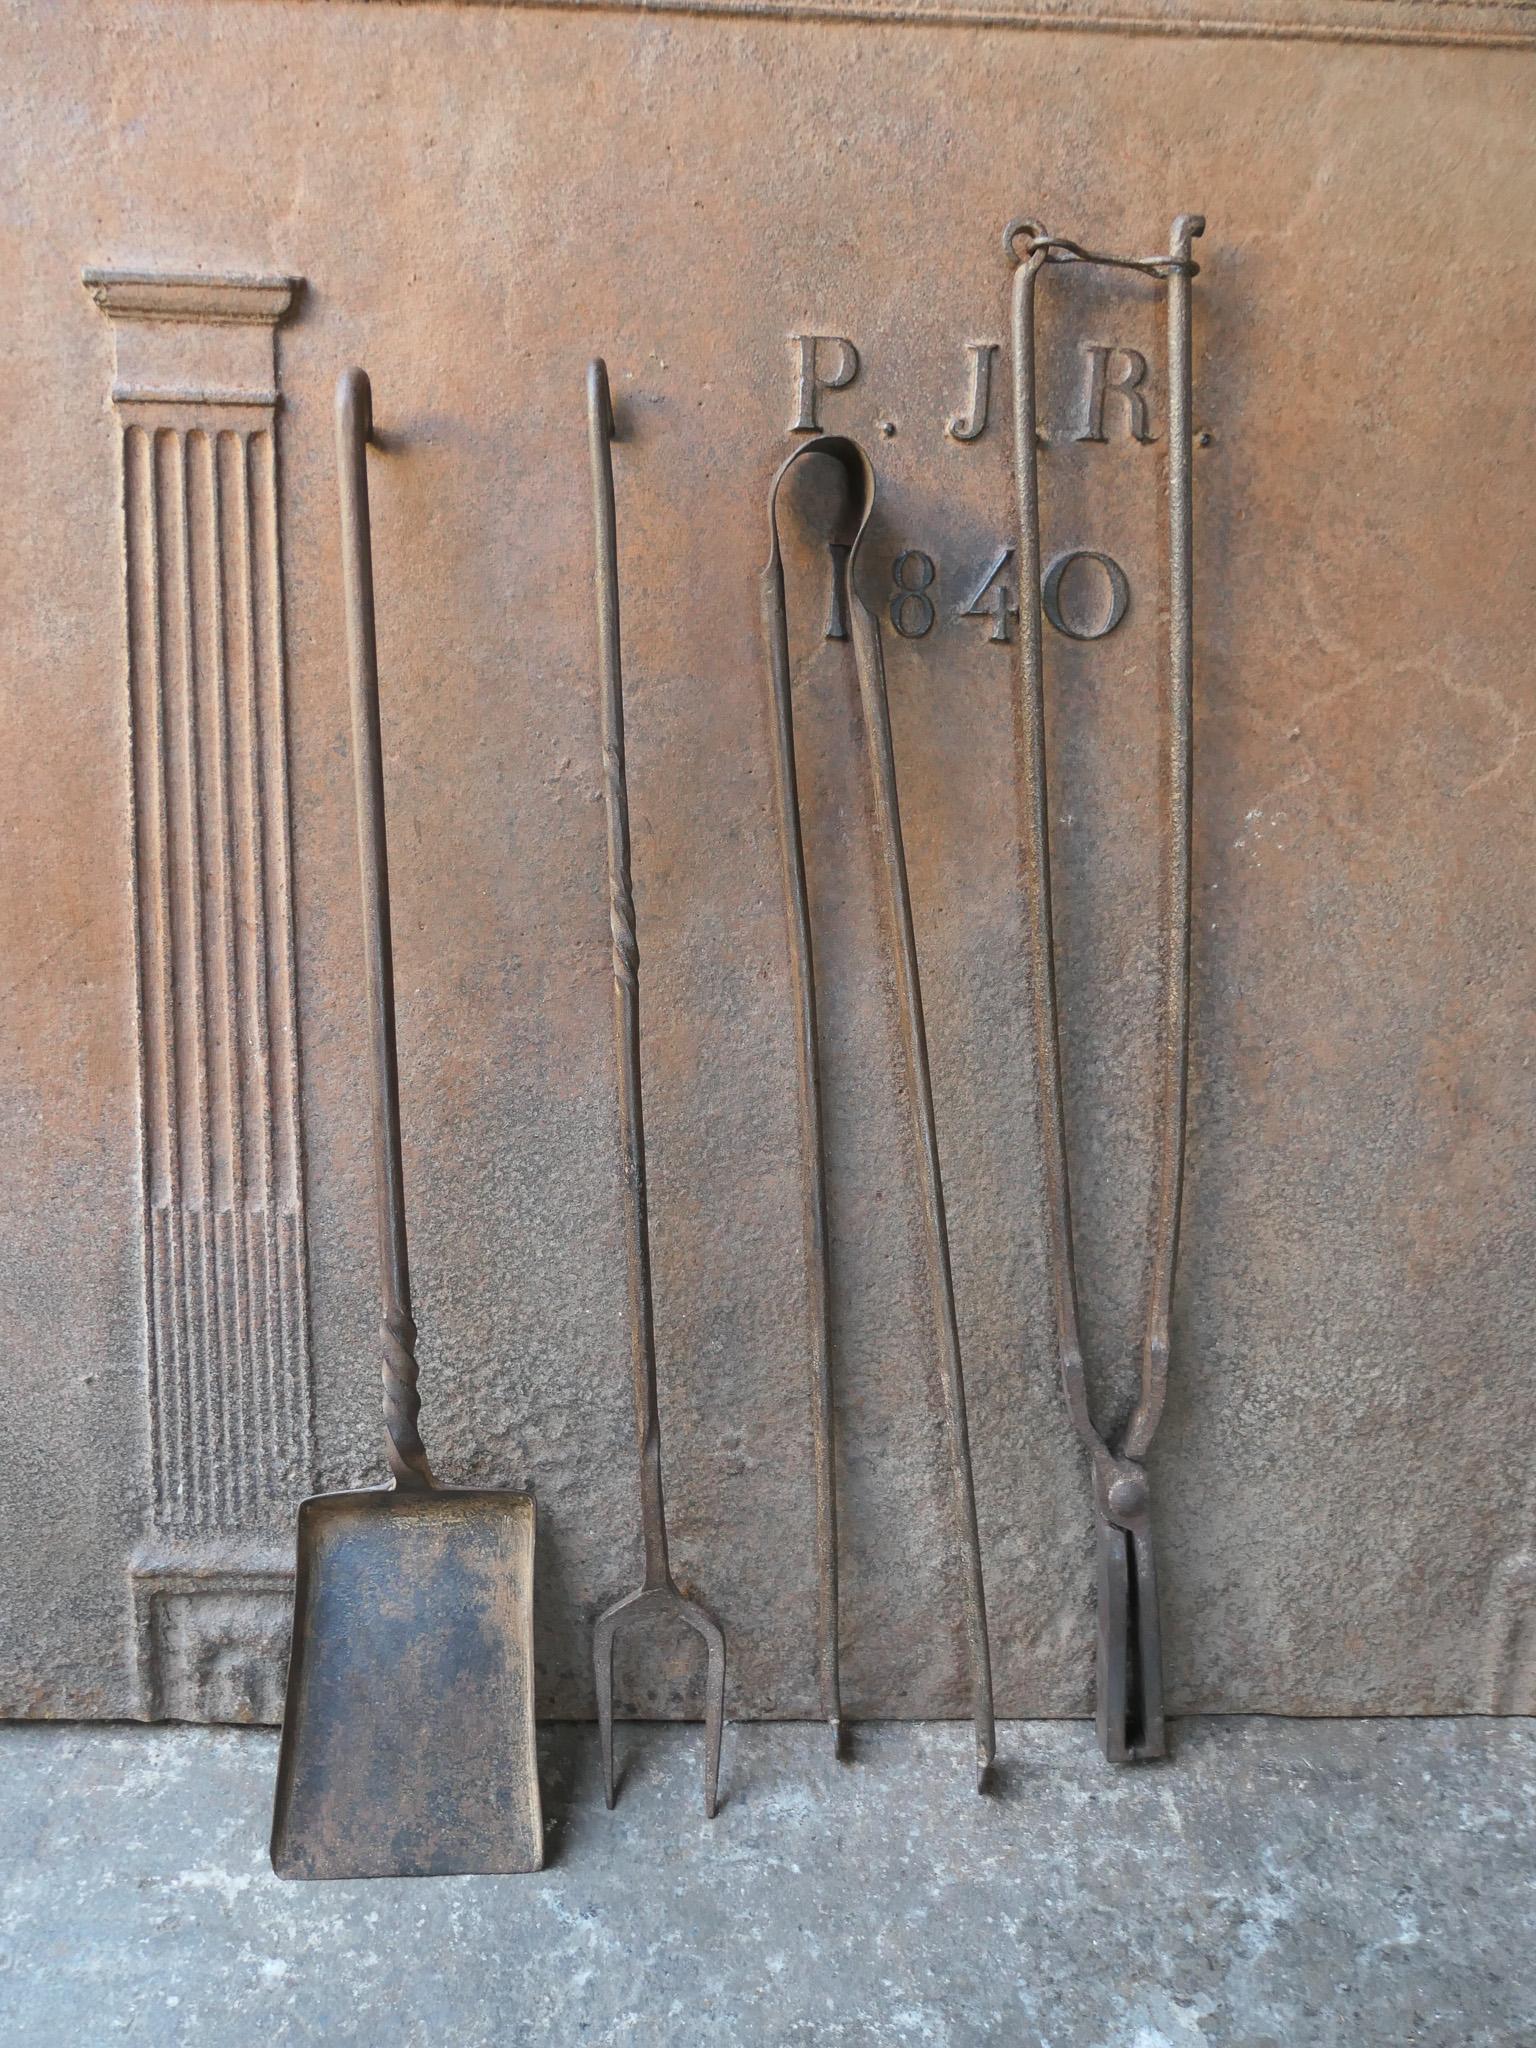 Large 17th-18th century French fireplace tool set. The tool set consists of fireplace tongs, shovel, fire fork and log tongs. The tools are made of wrought iron. The set is in a good condition and fit for use in the fireplace.